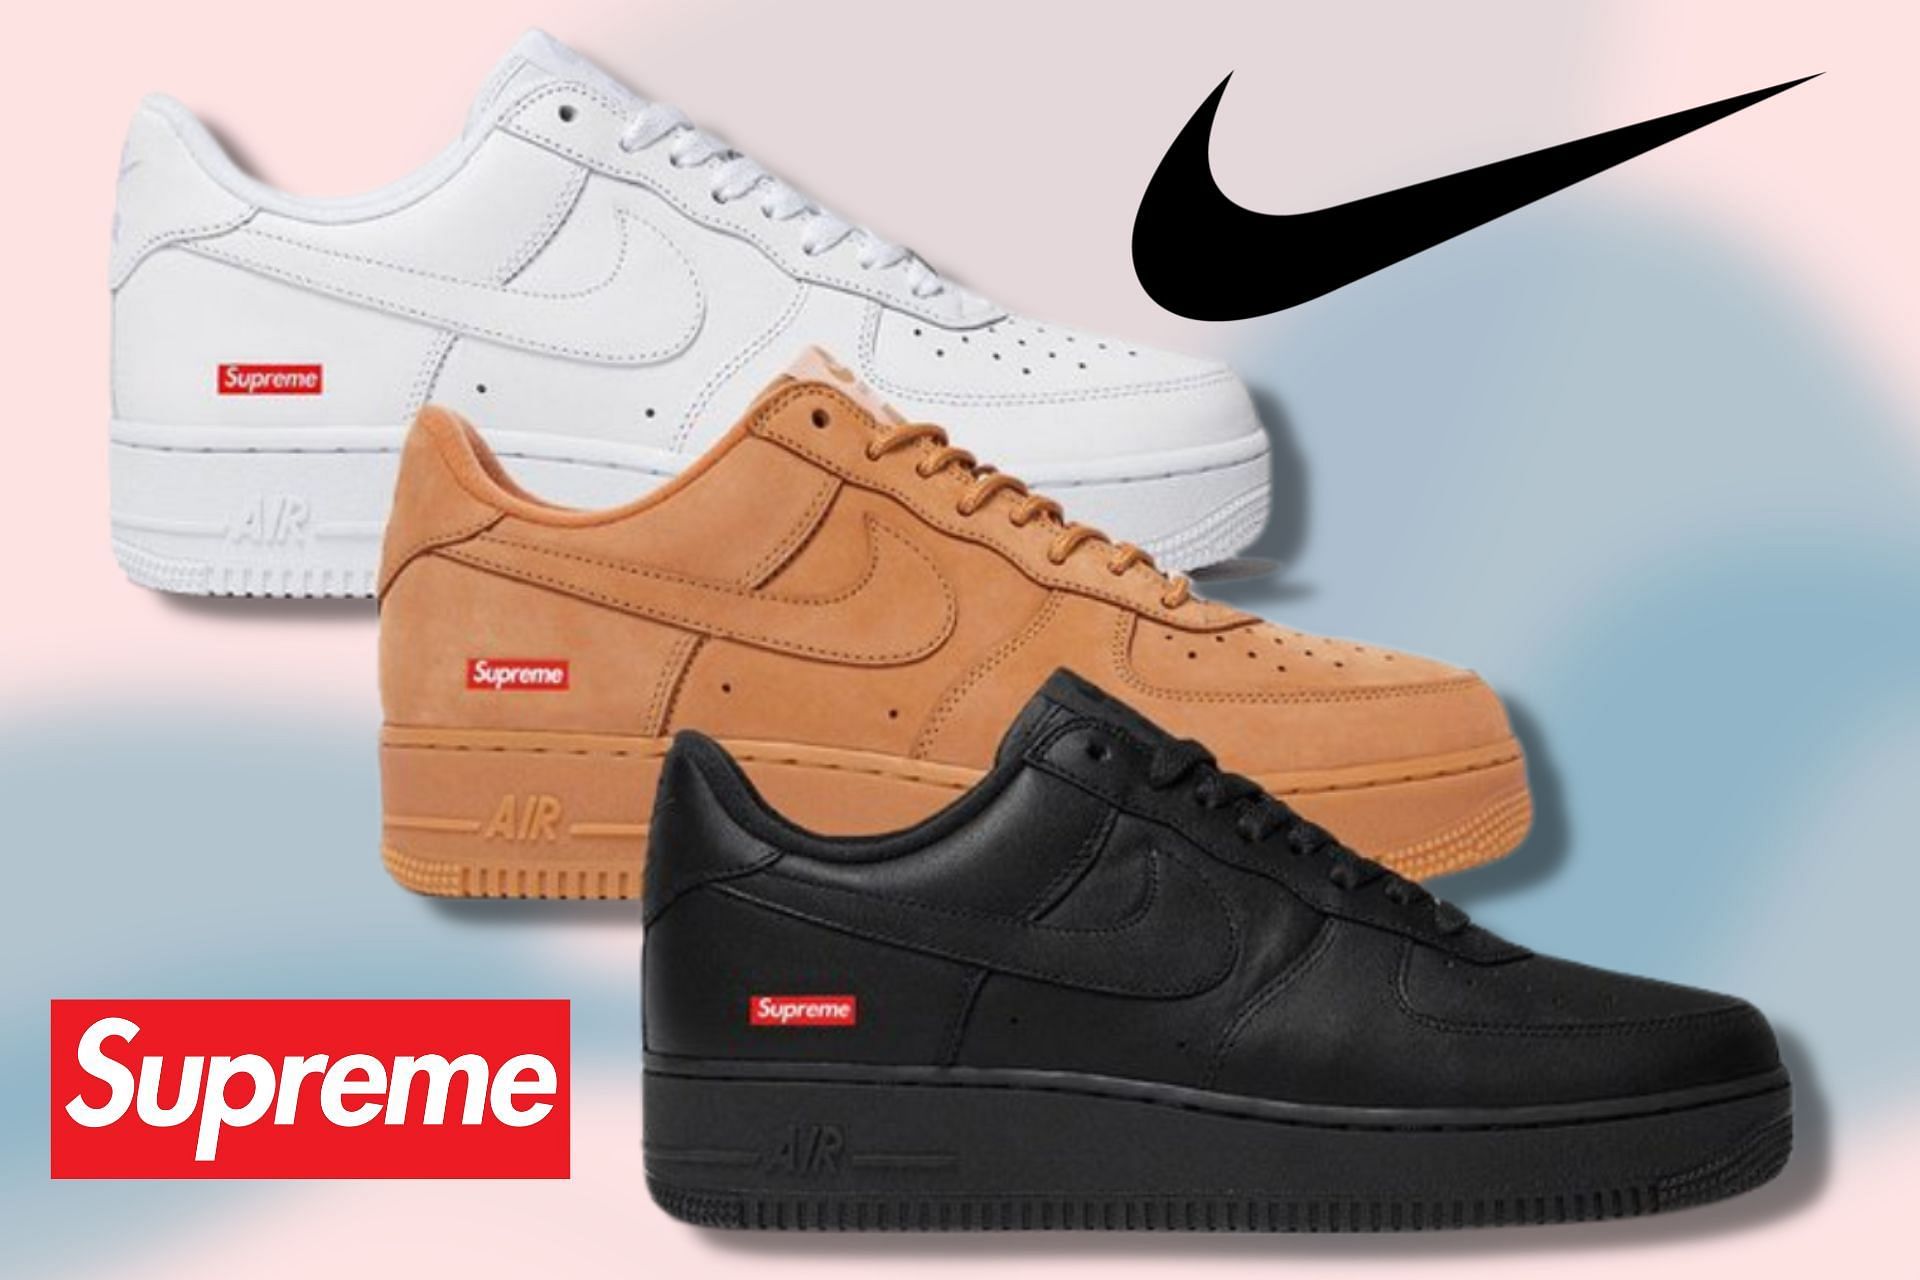 Ofensa Realizable Naufragio Where to buy Supreme x Nike Air Force 1 Low footwear pack? Price, release  date, and more details explored